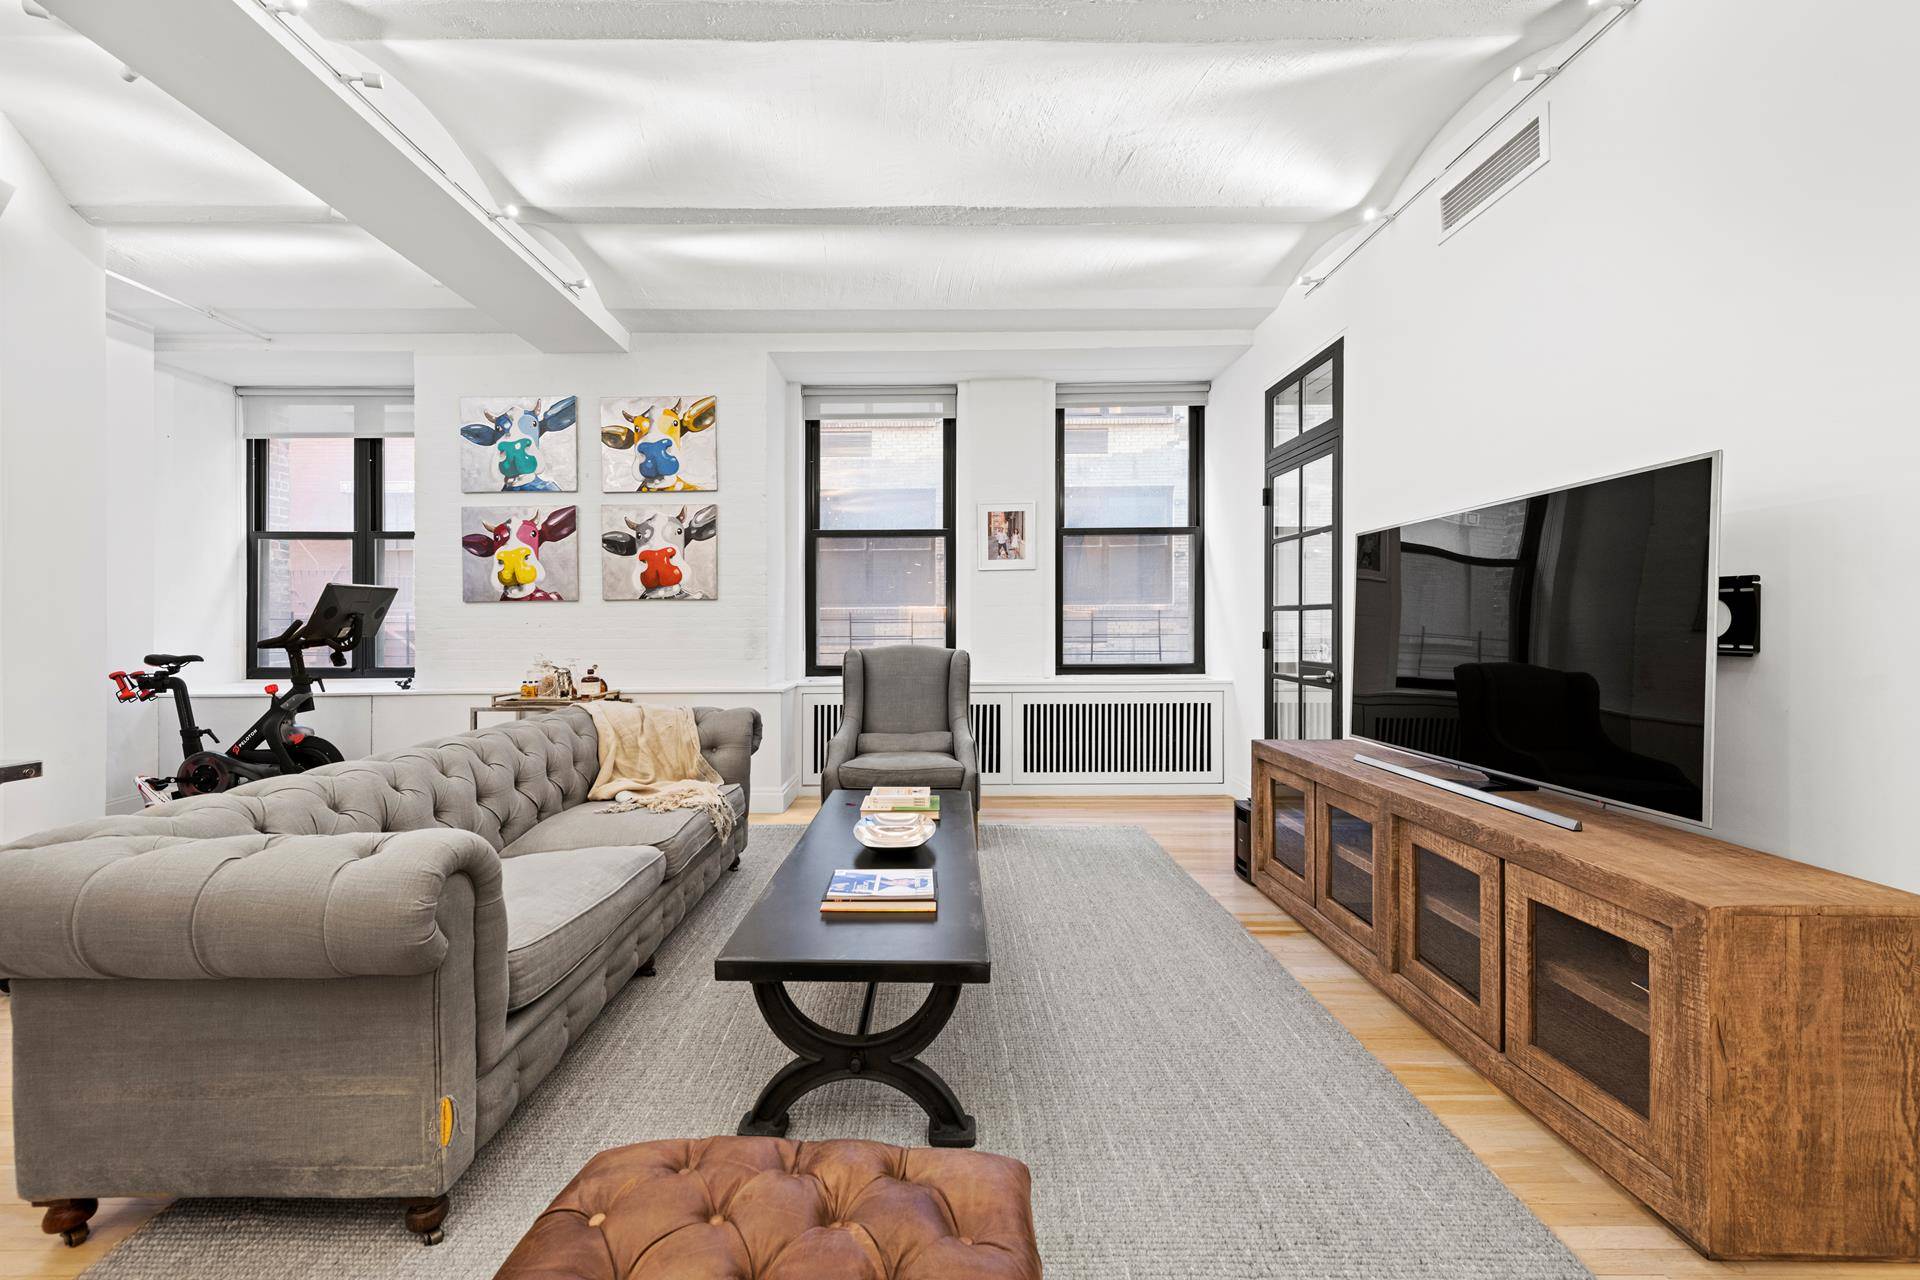 Located on a prized block in prime Tribeca, this 2 bedroom, 1.